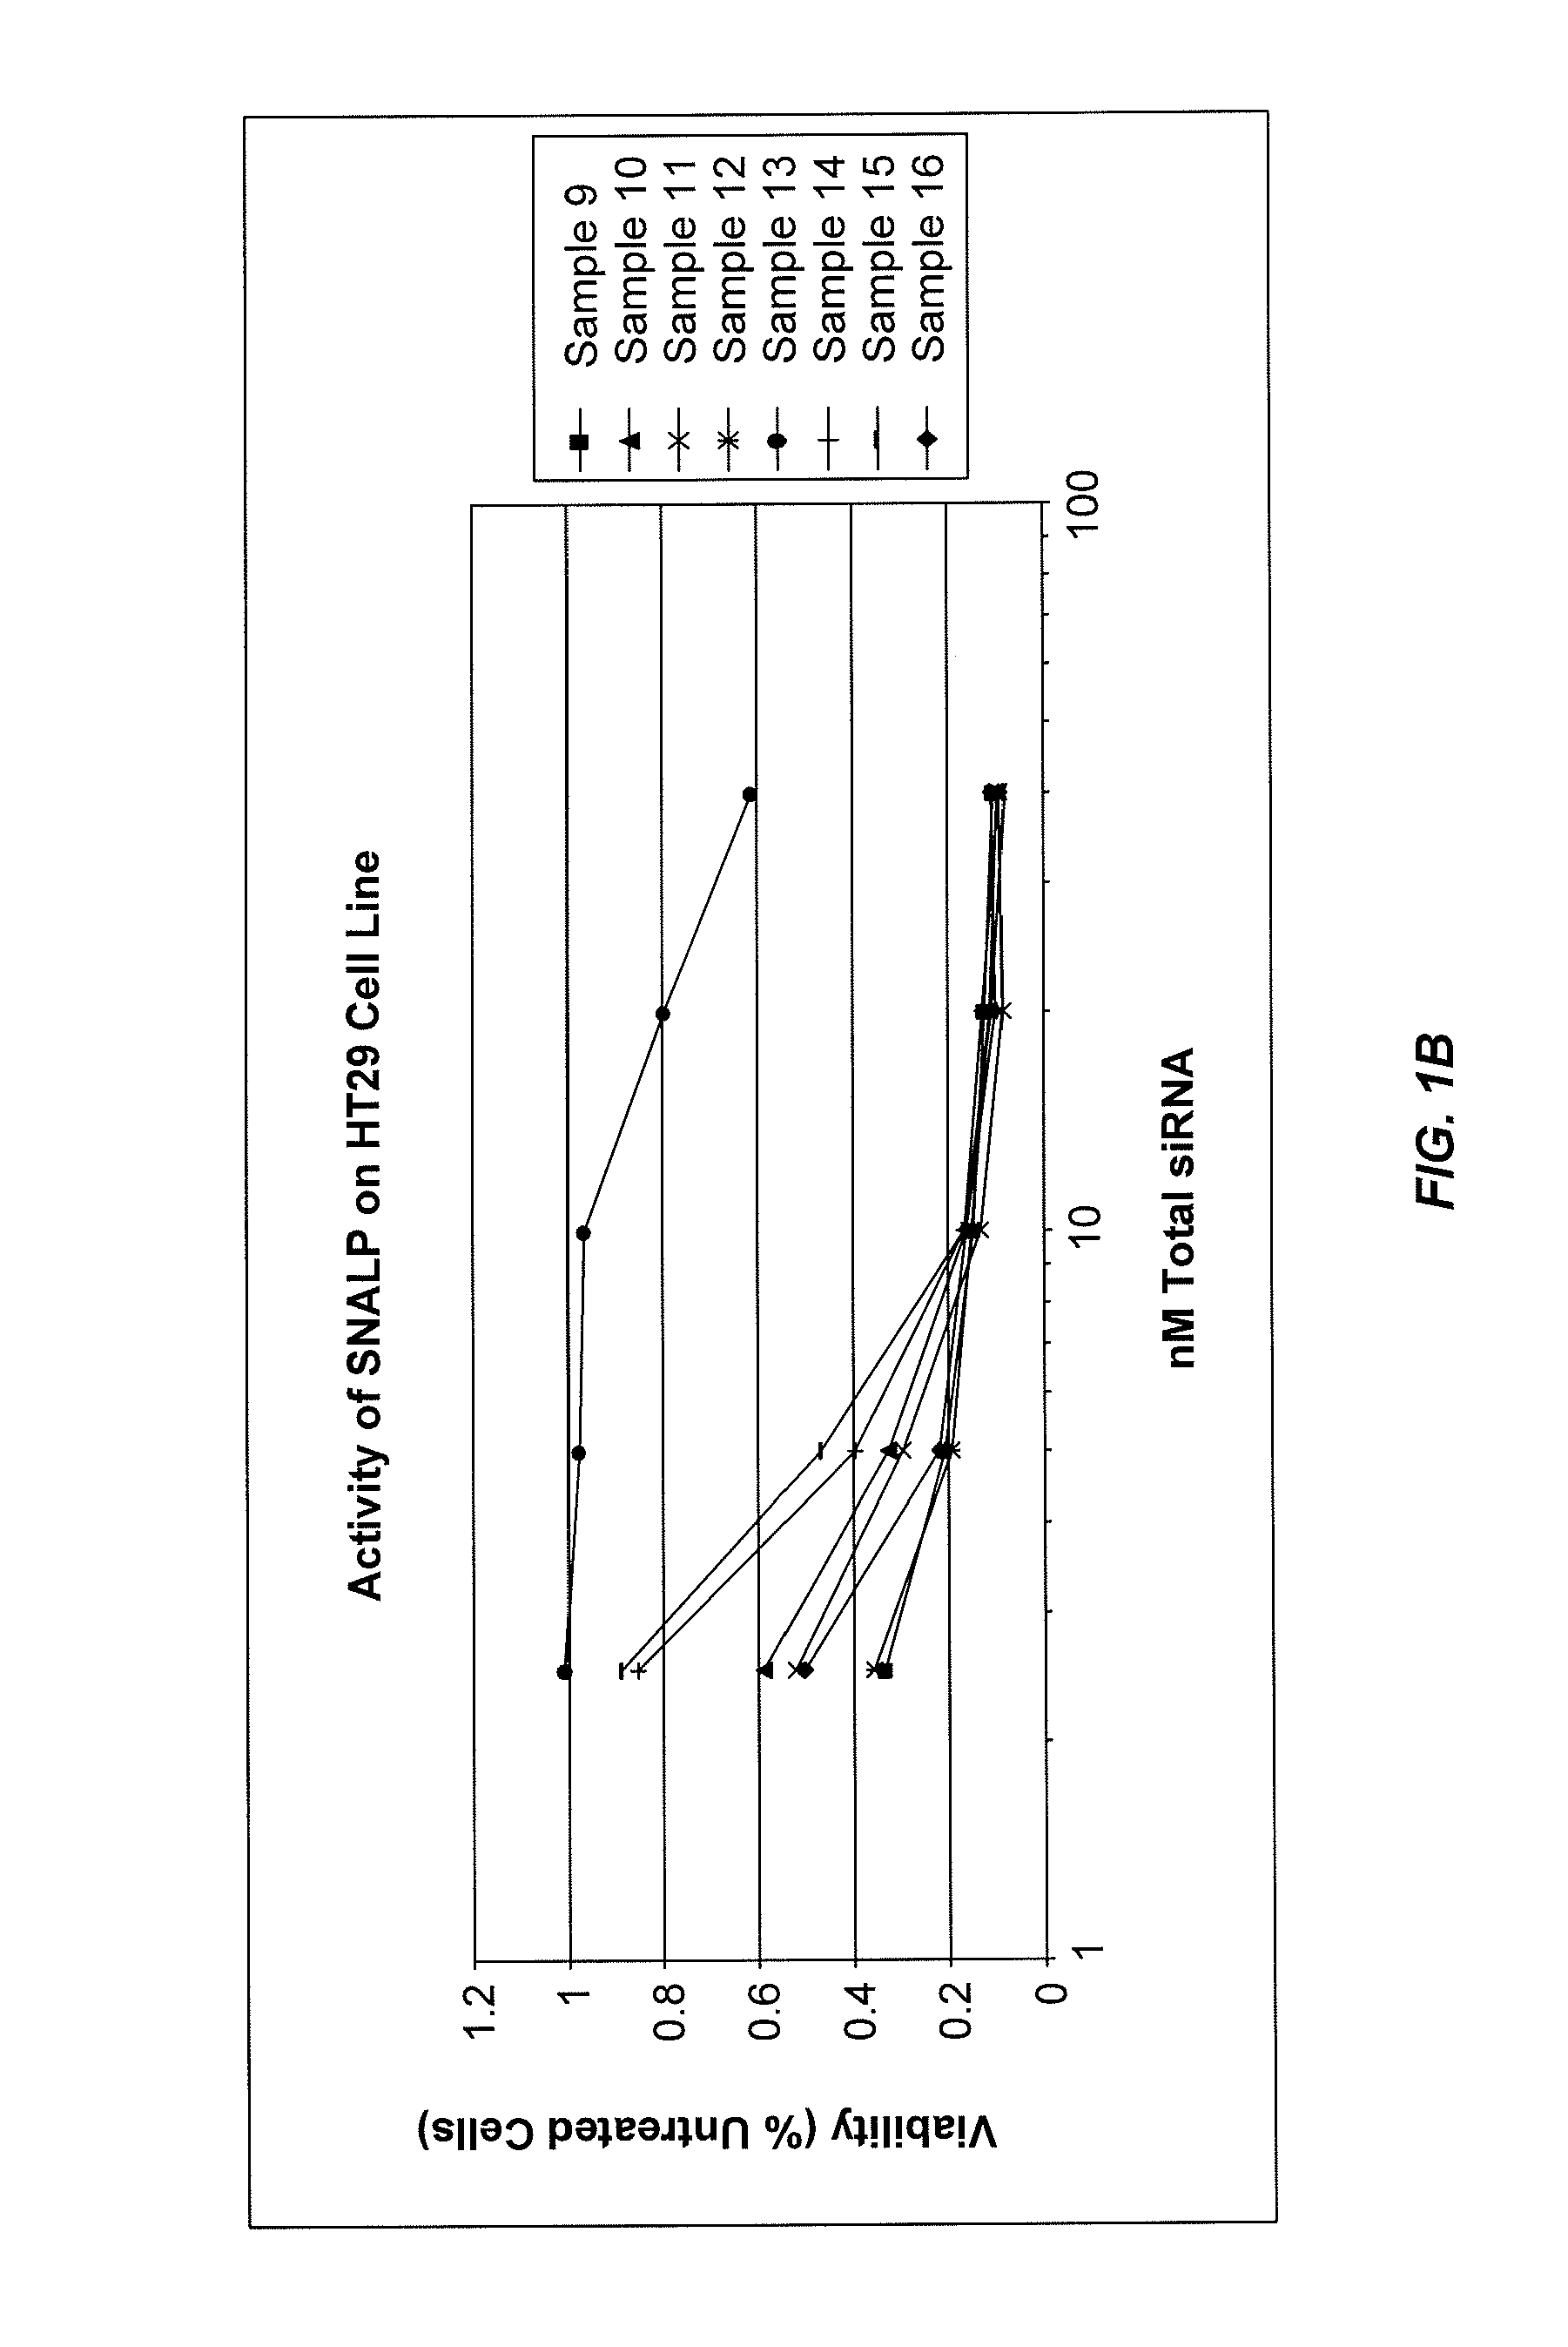 Lipid formulations for nucleic acid delivery